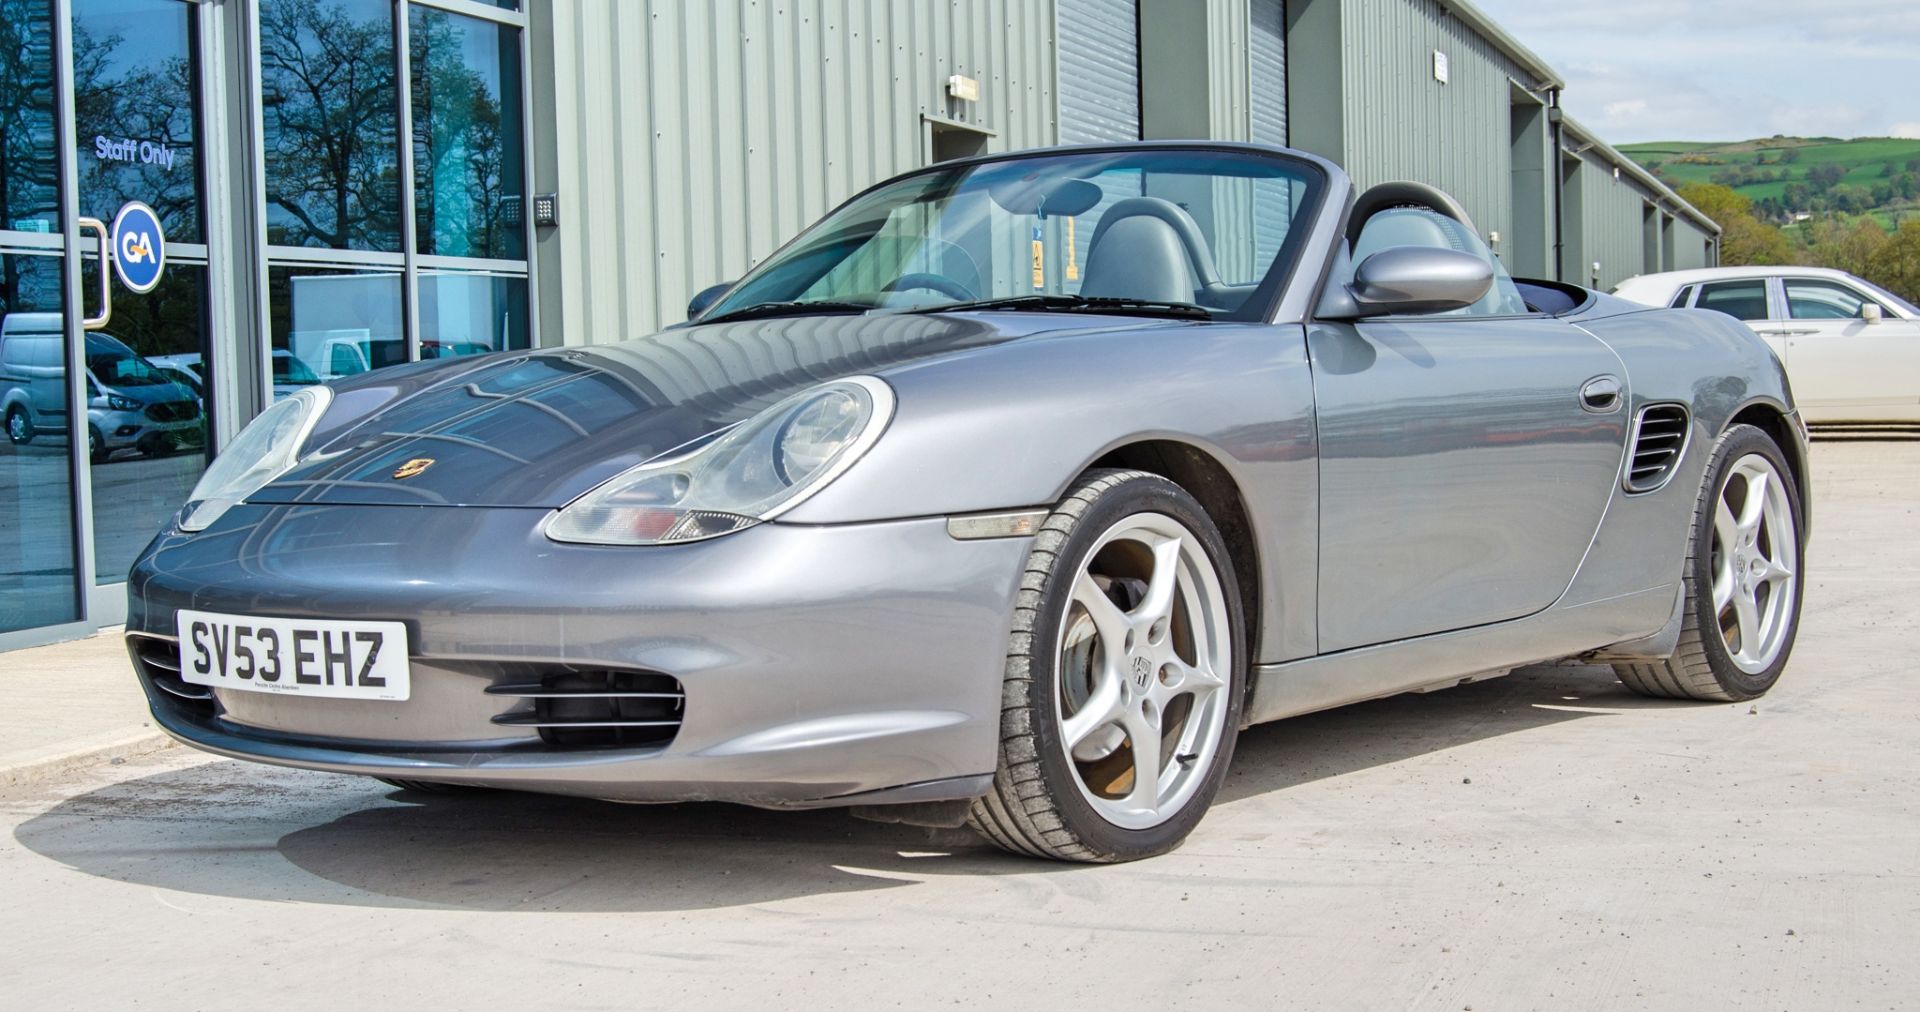 2003 Porsche Boxster 2.7 5 speed manual convertible roadster - Image 3 of 50